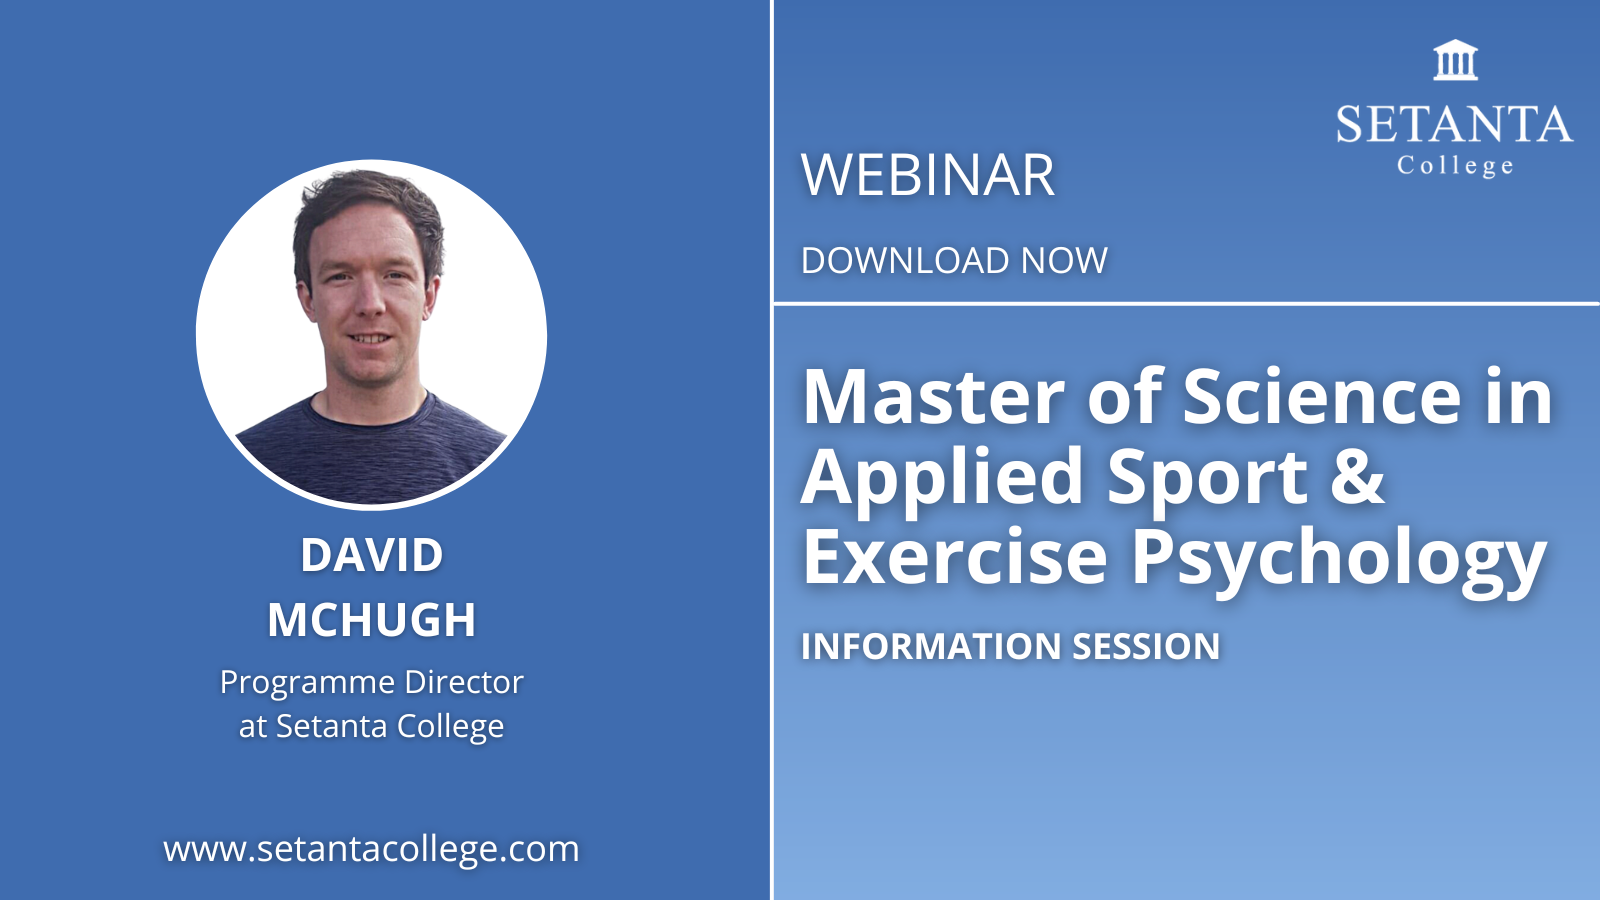 Master of Science in Applied Sport & Exercise Psychology